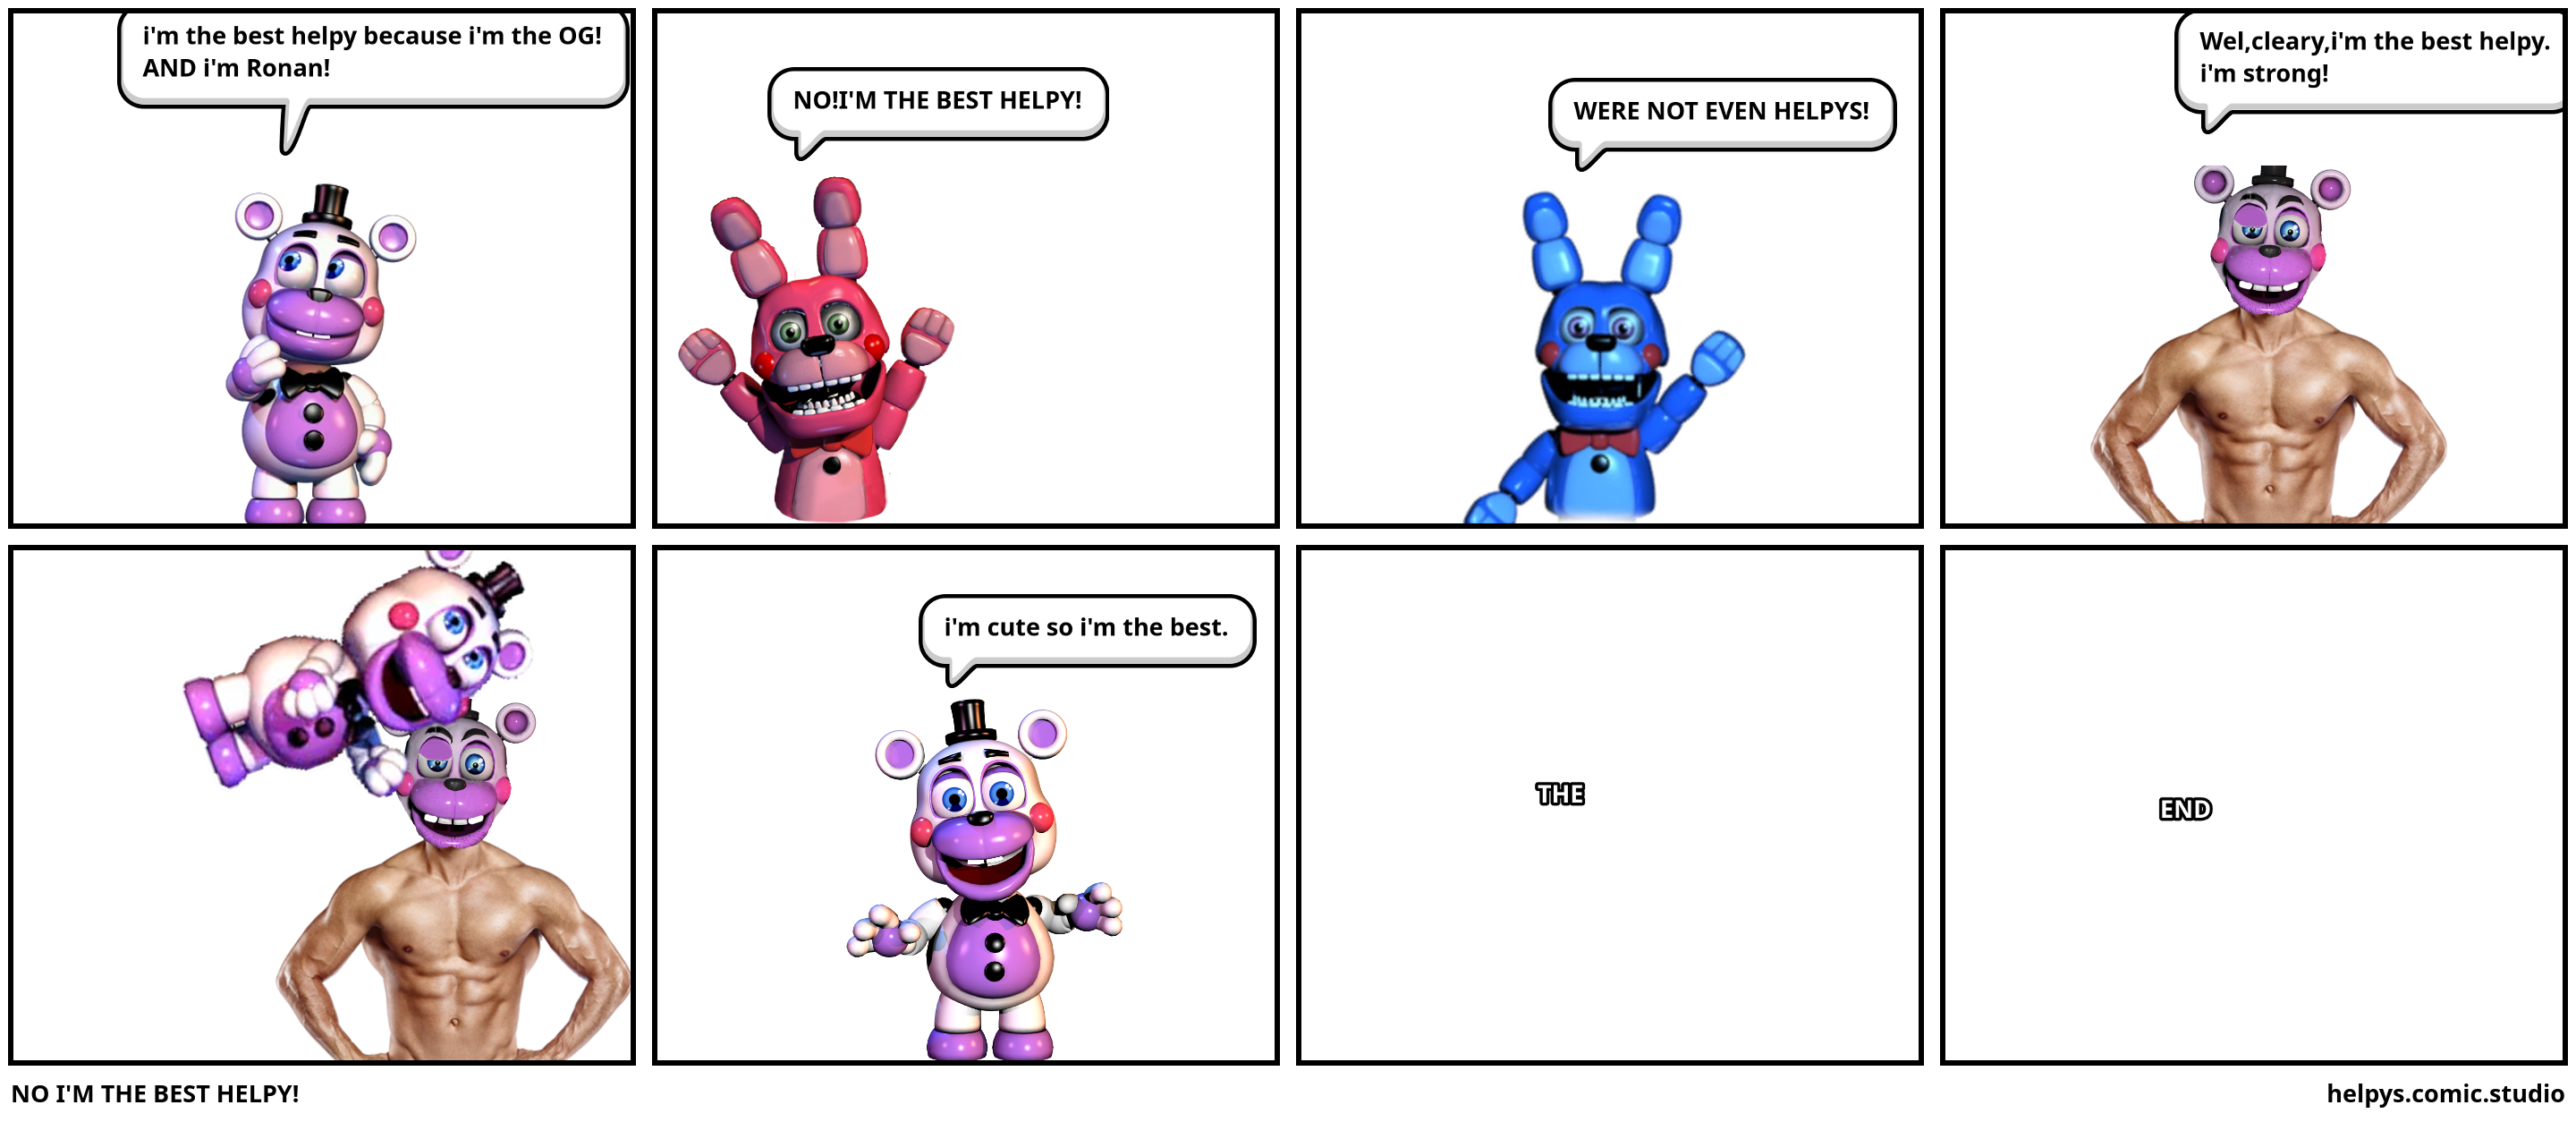 NO I'M THE BEST HELPY!